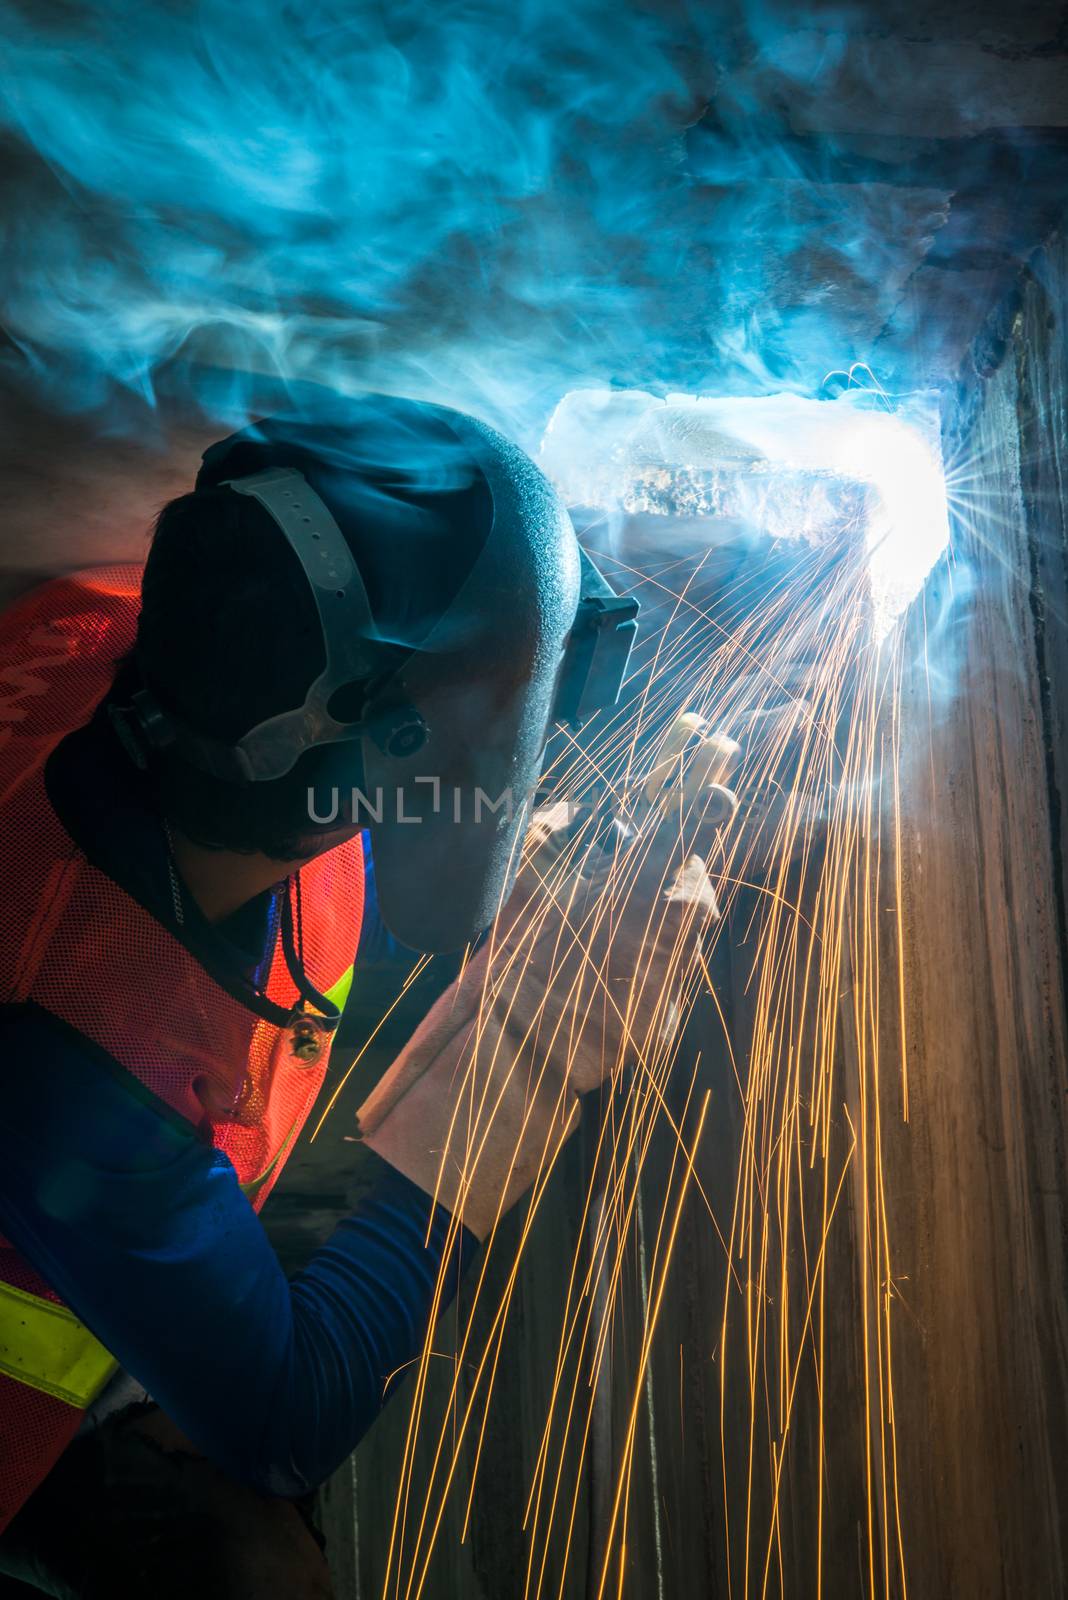 worker welding metal with sparks